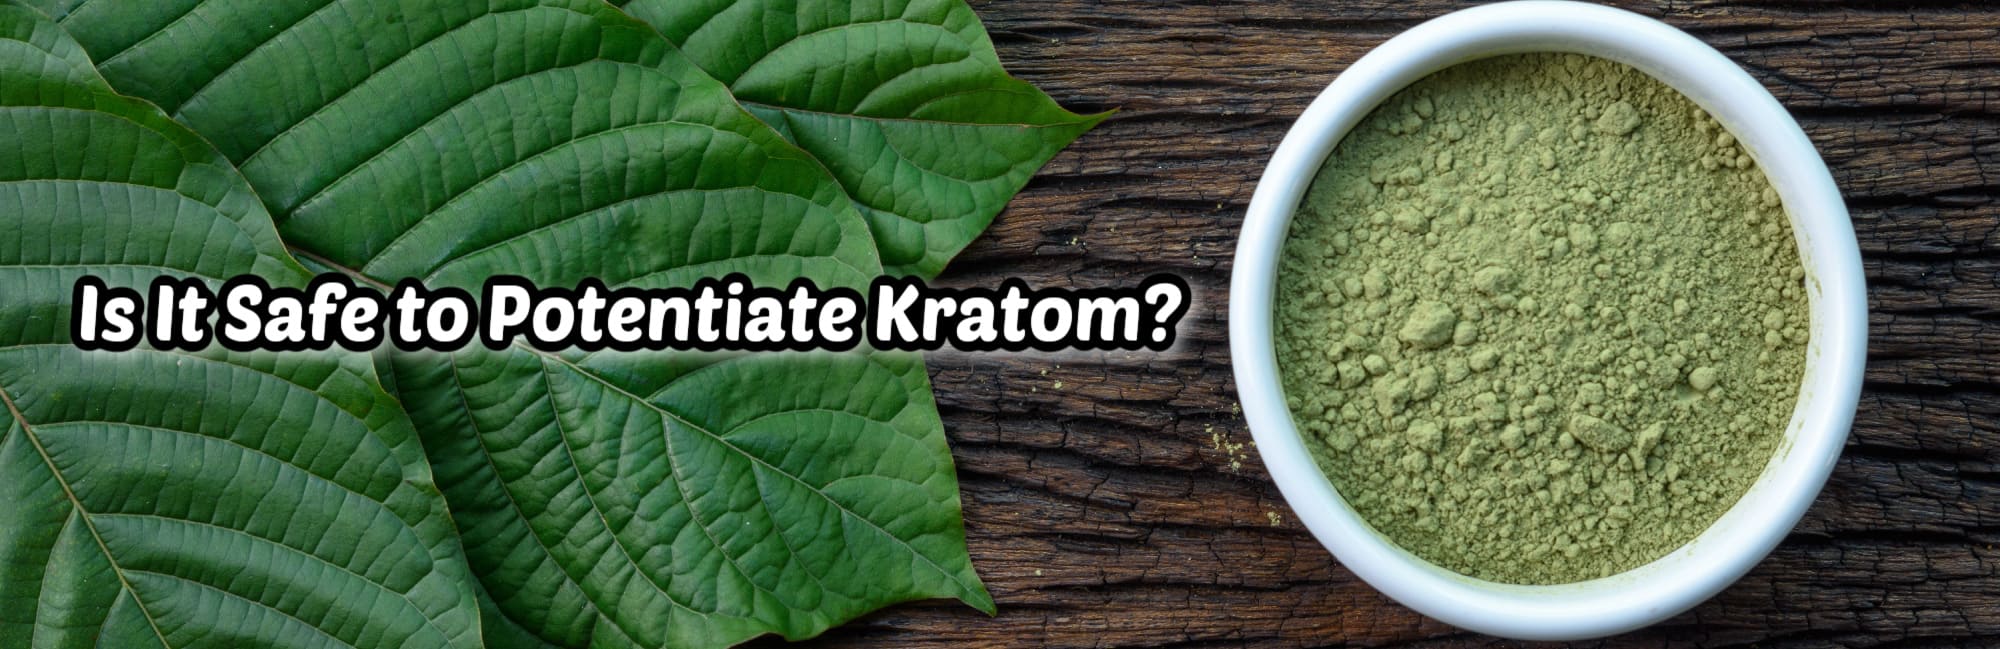 image of is it safe to potentiate kratom